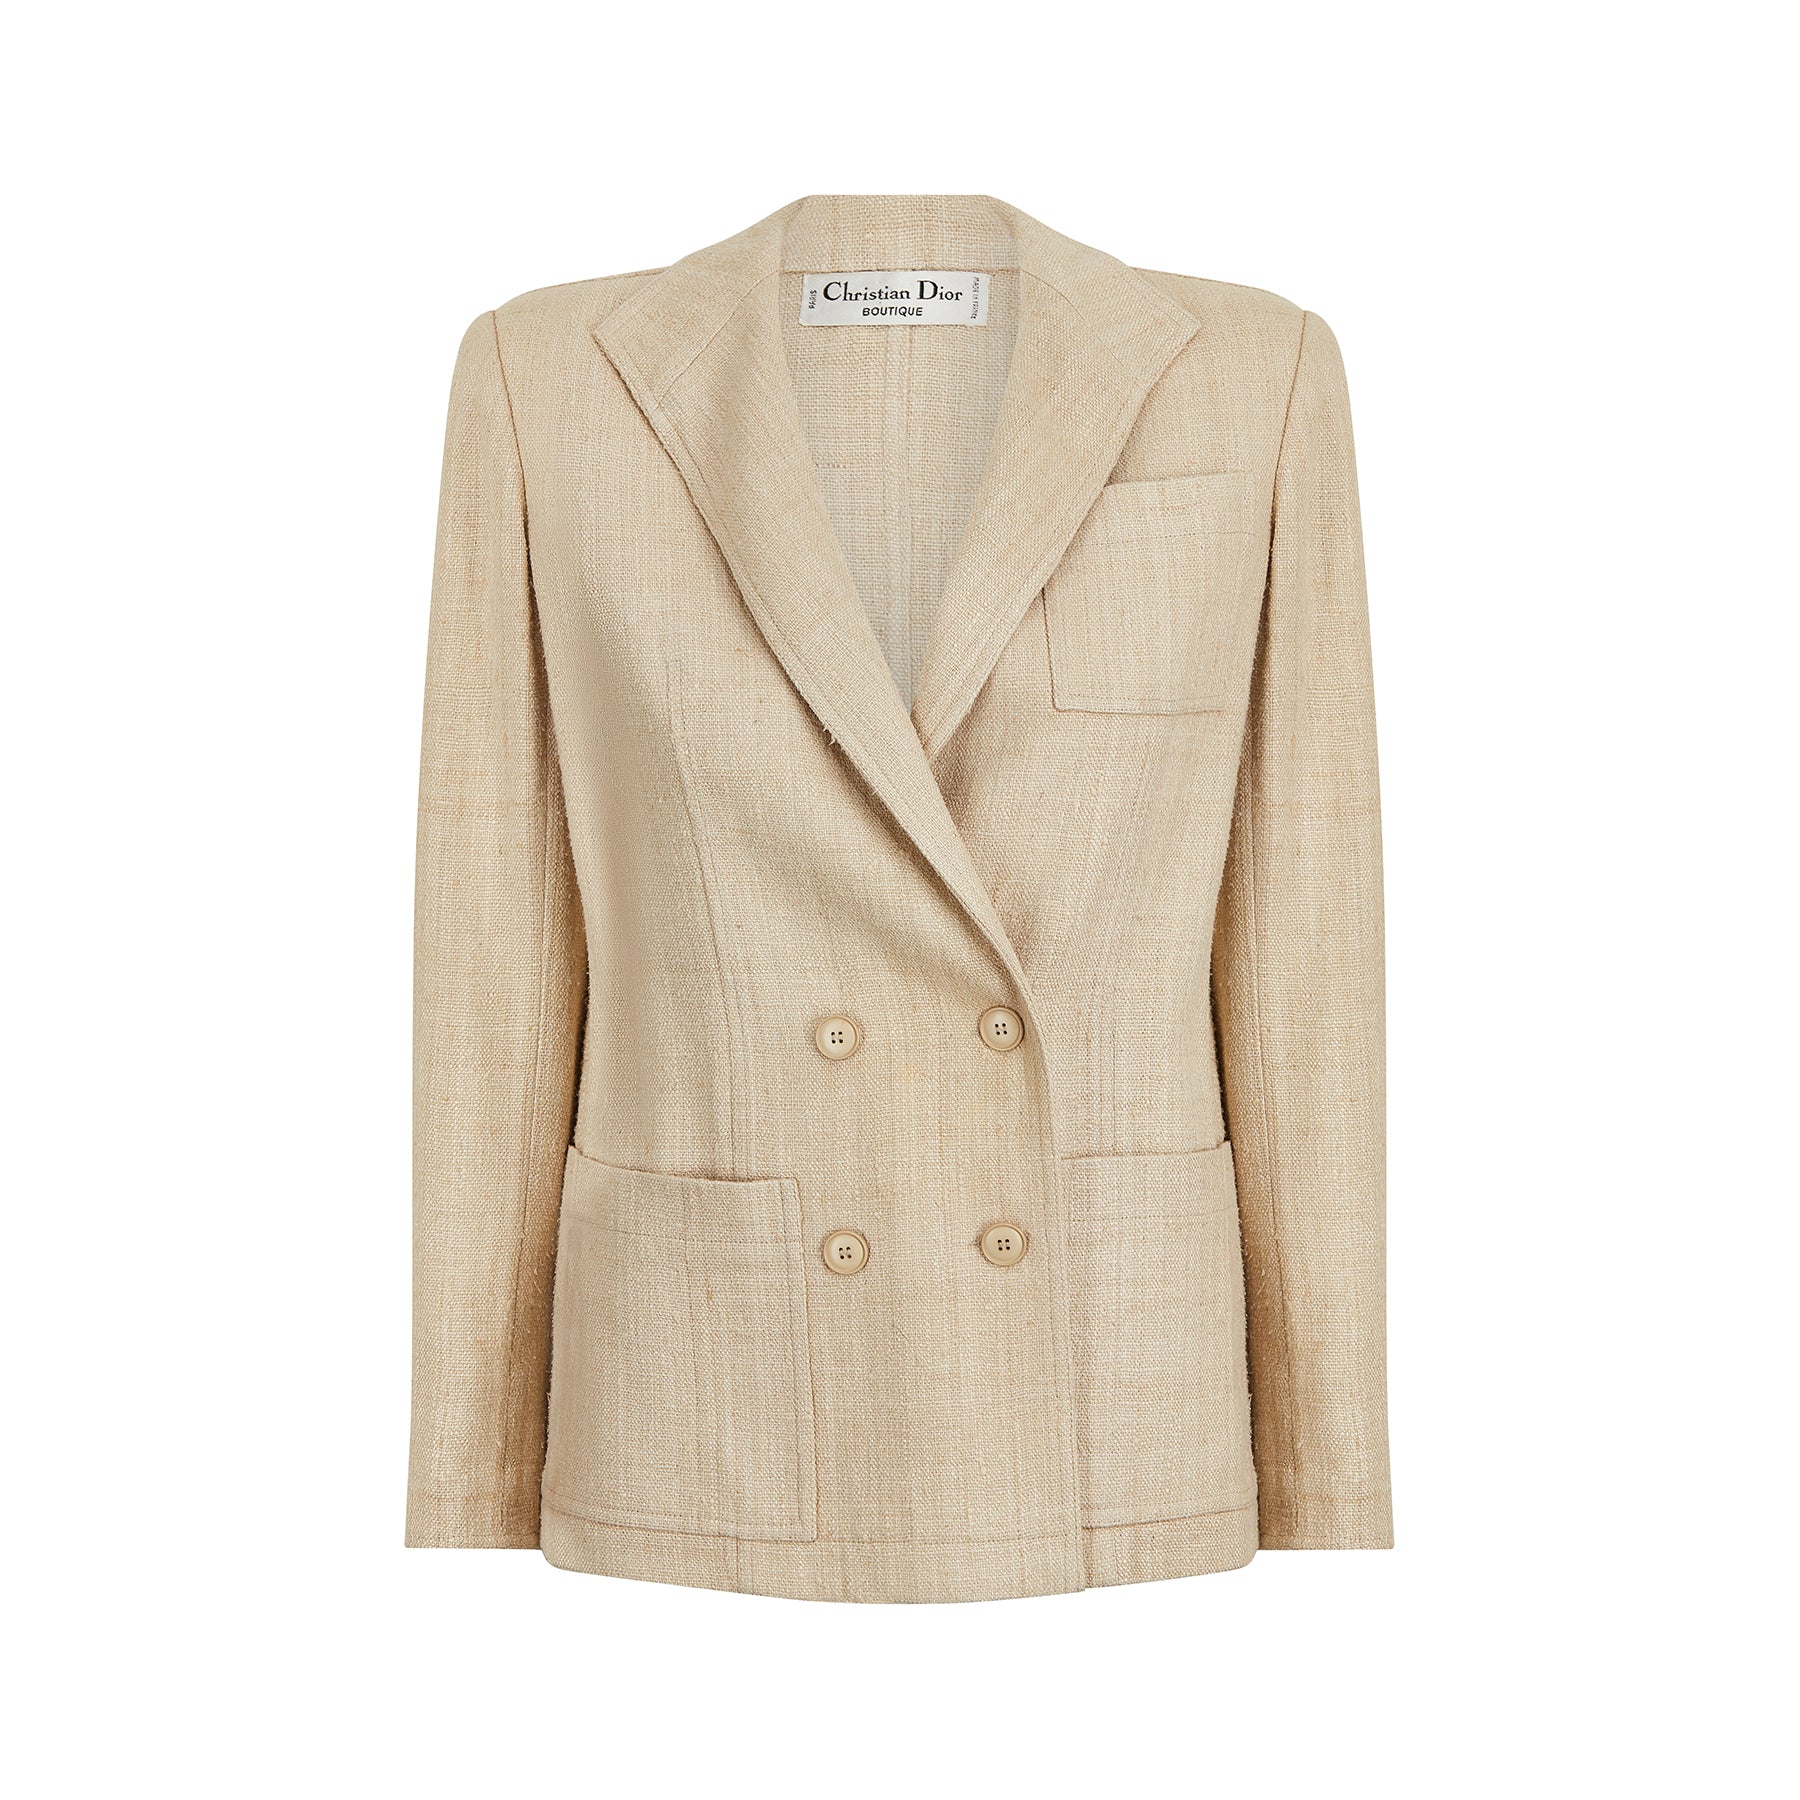 1990s Christian Dior Oatmeal Linen Double Breasted Jacket